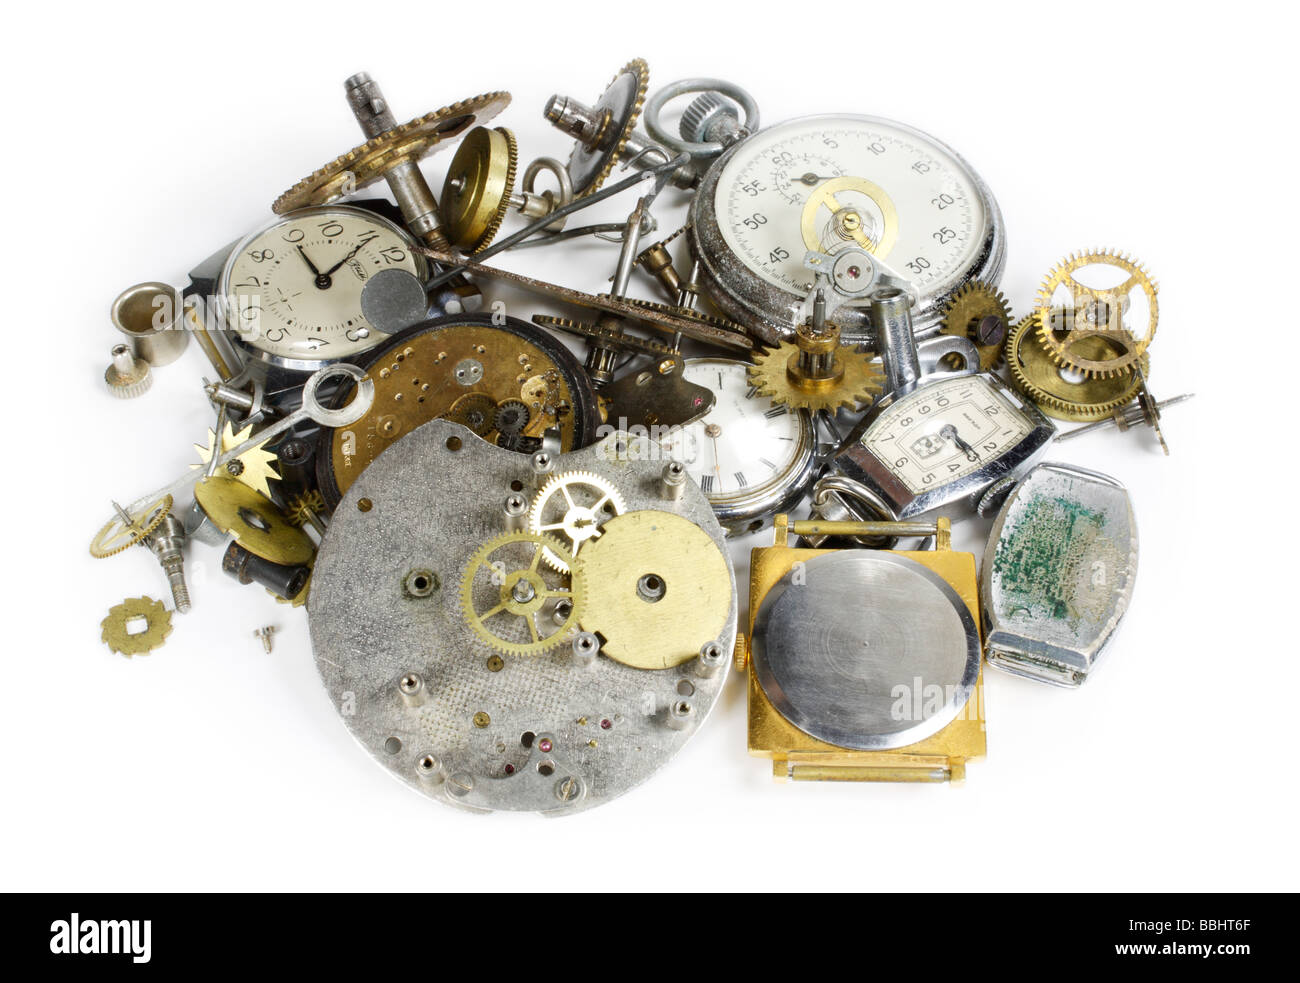 A watch keeps Time.  Many old broken watches Stock Photo